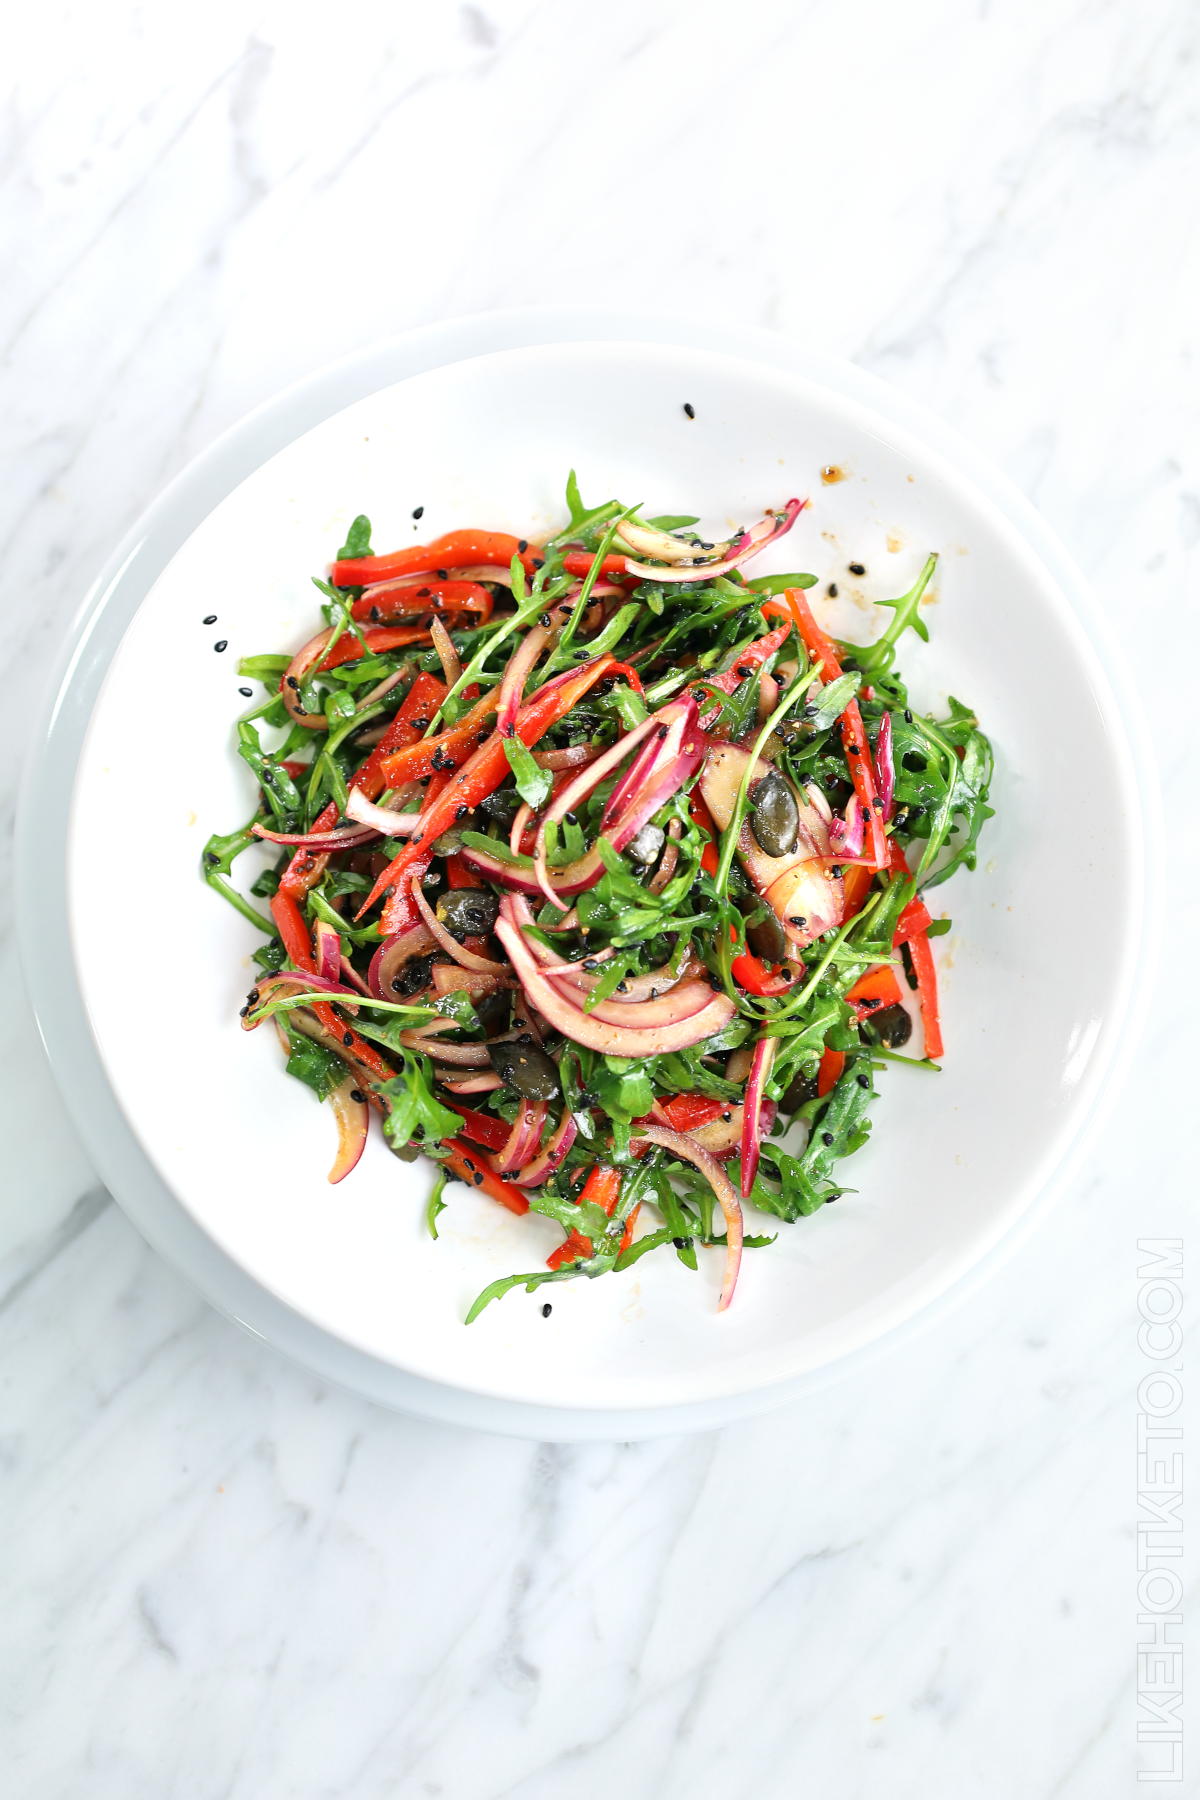 Colorful arugula salad with pepitas and black sesame, red onion and pepper.